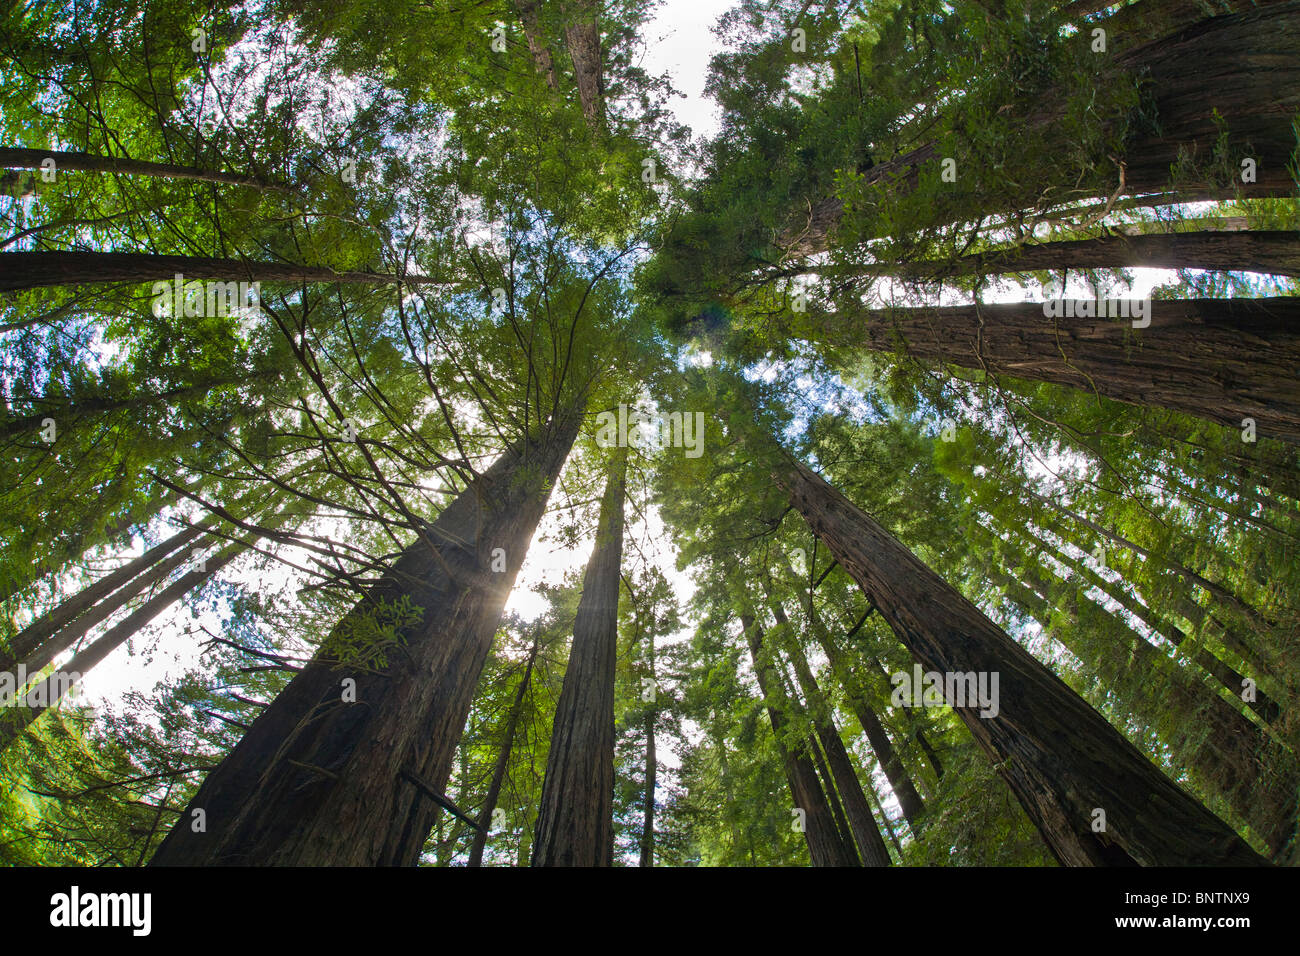 Redwood trees in Humboldt Redwoods State Park in Northern California Stock Photo